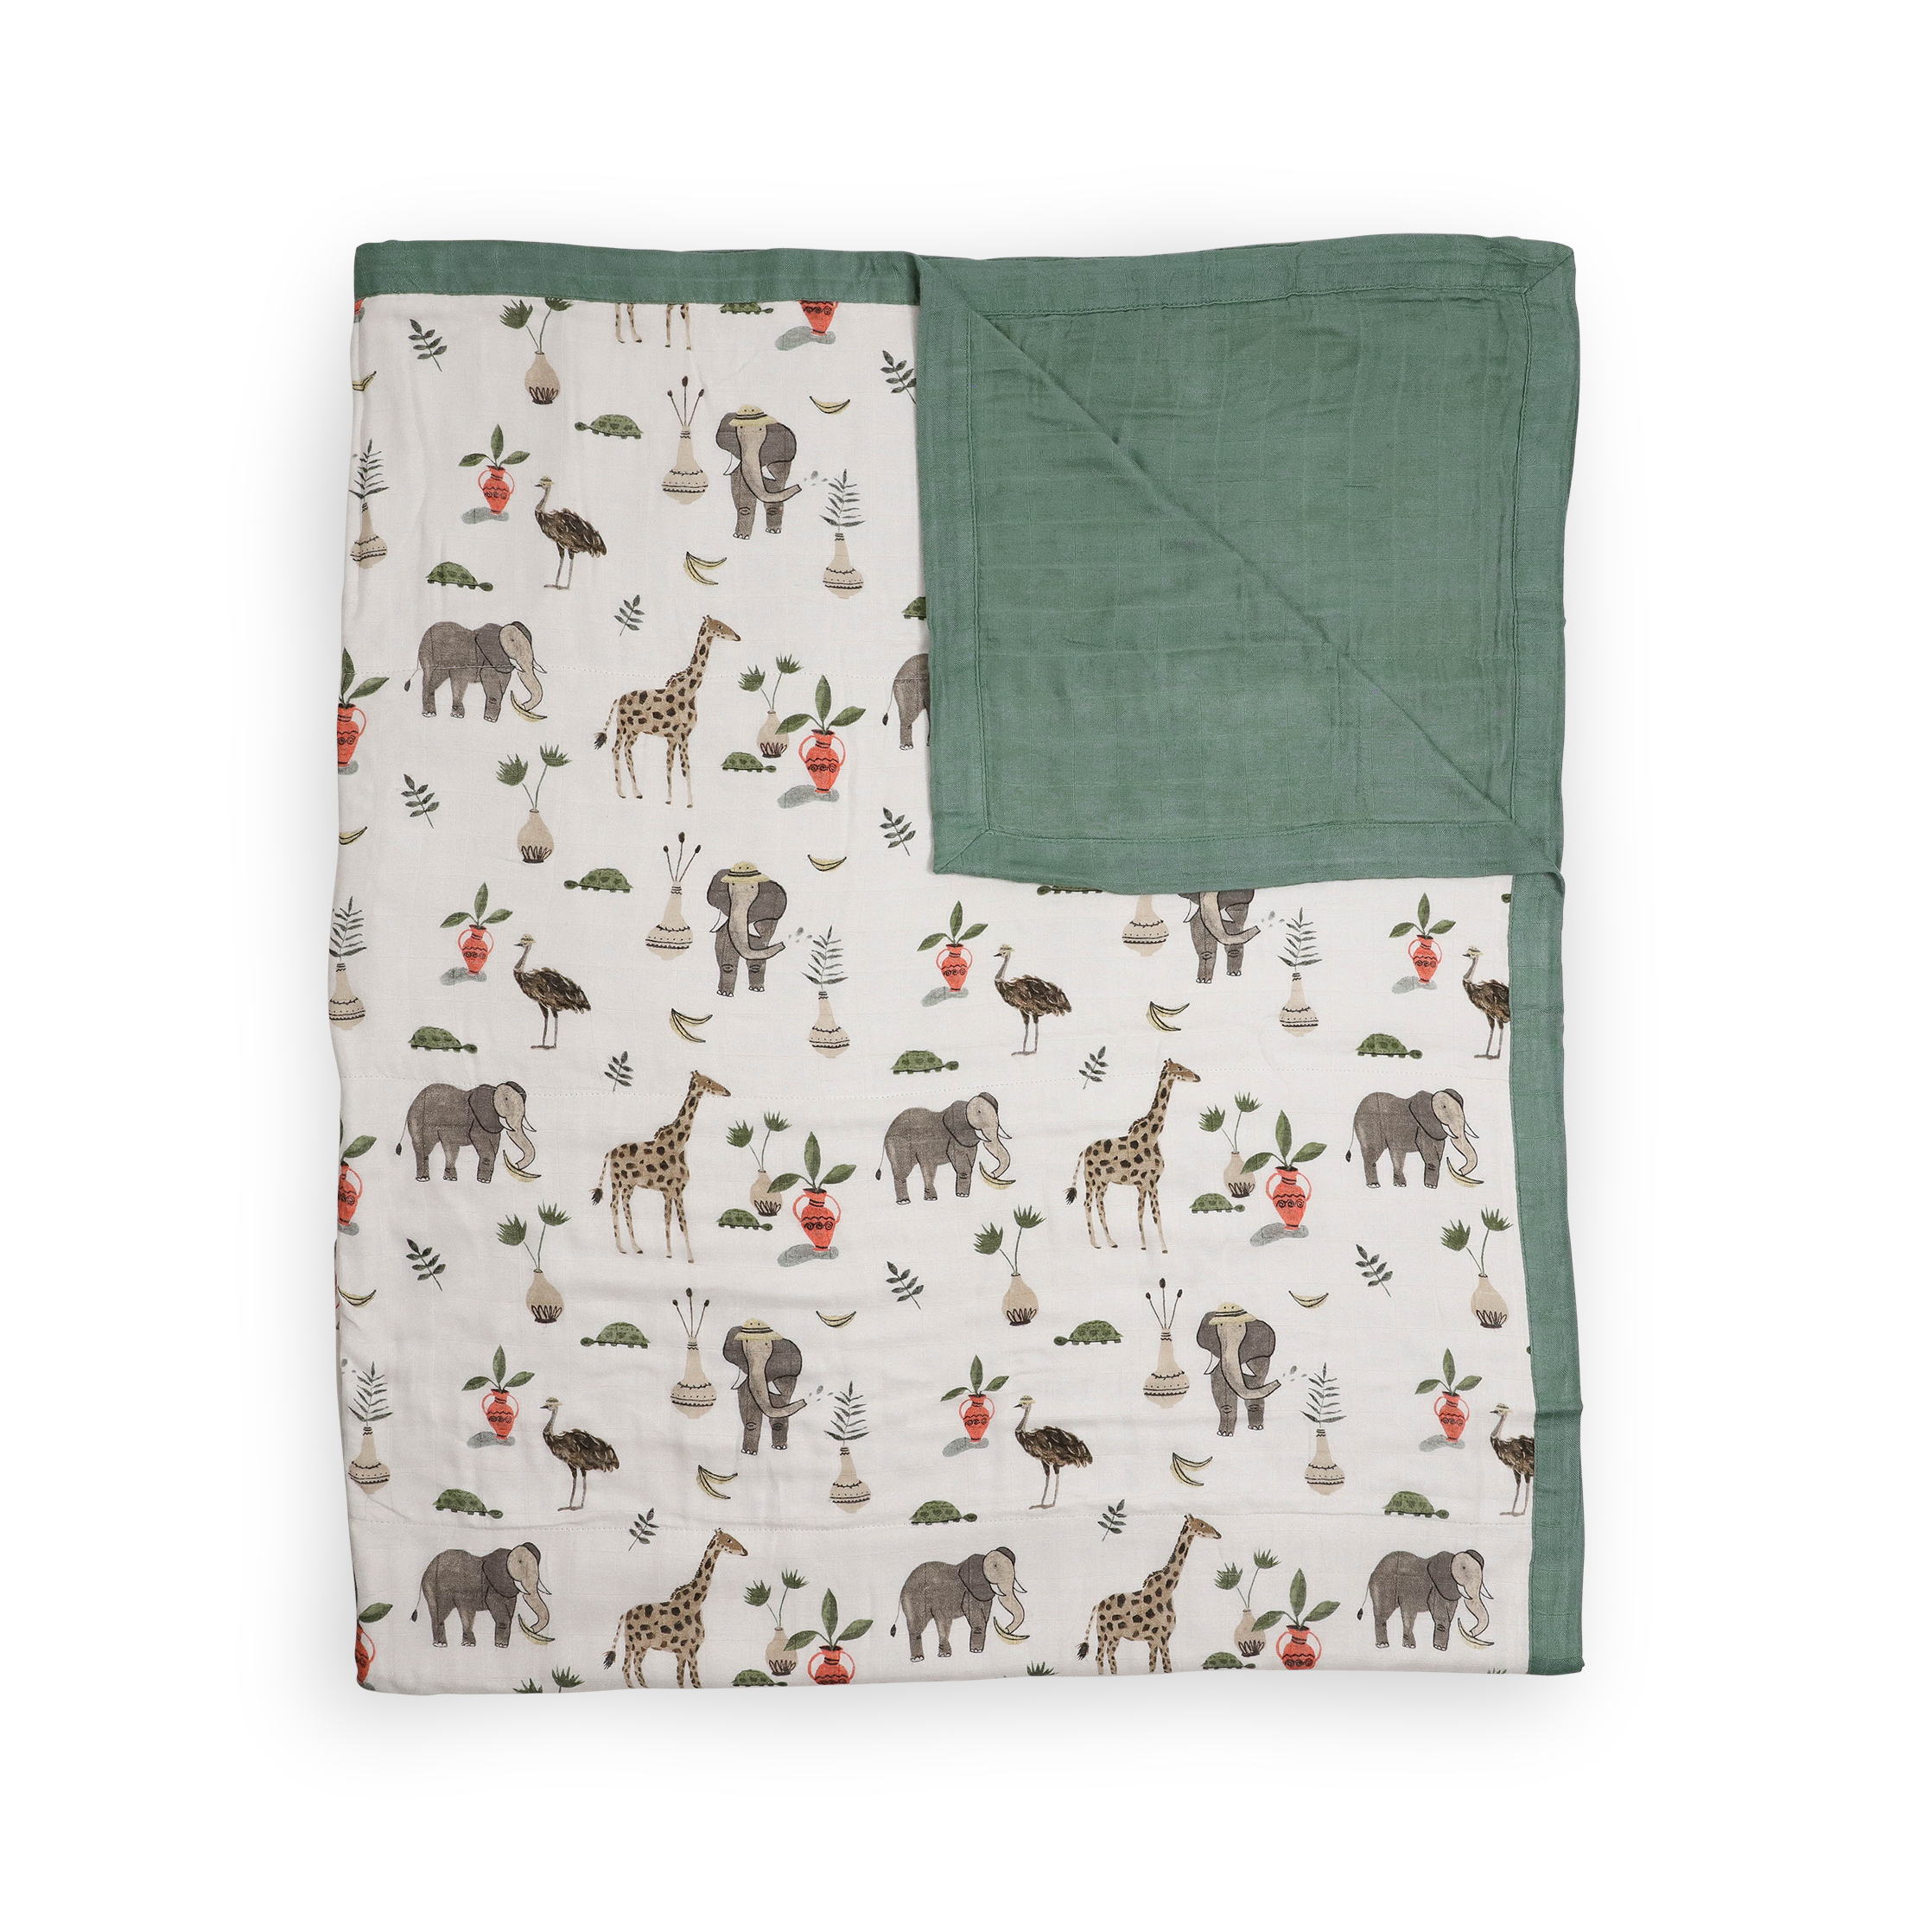 Deluxe Muslin Quilted Throw - Safari Social 2